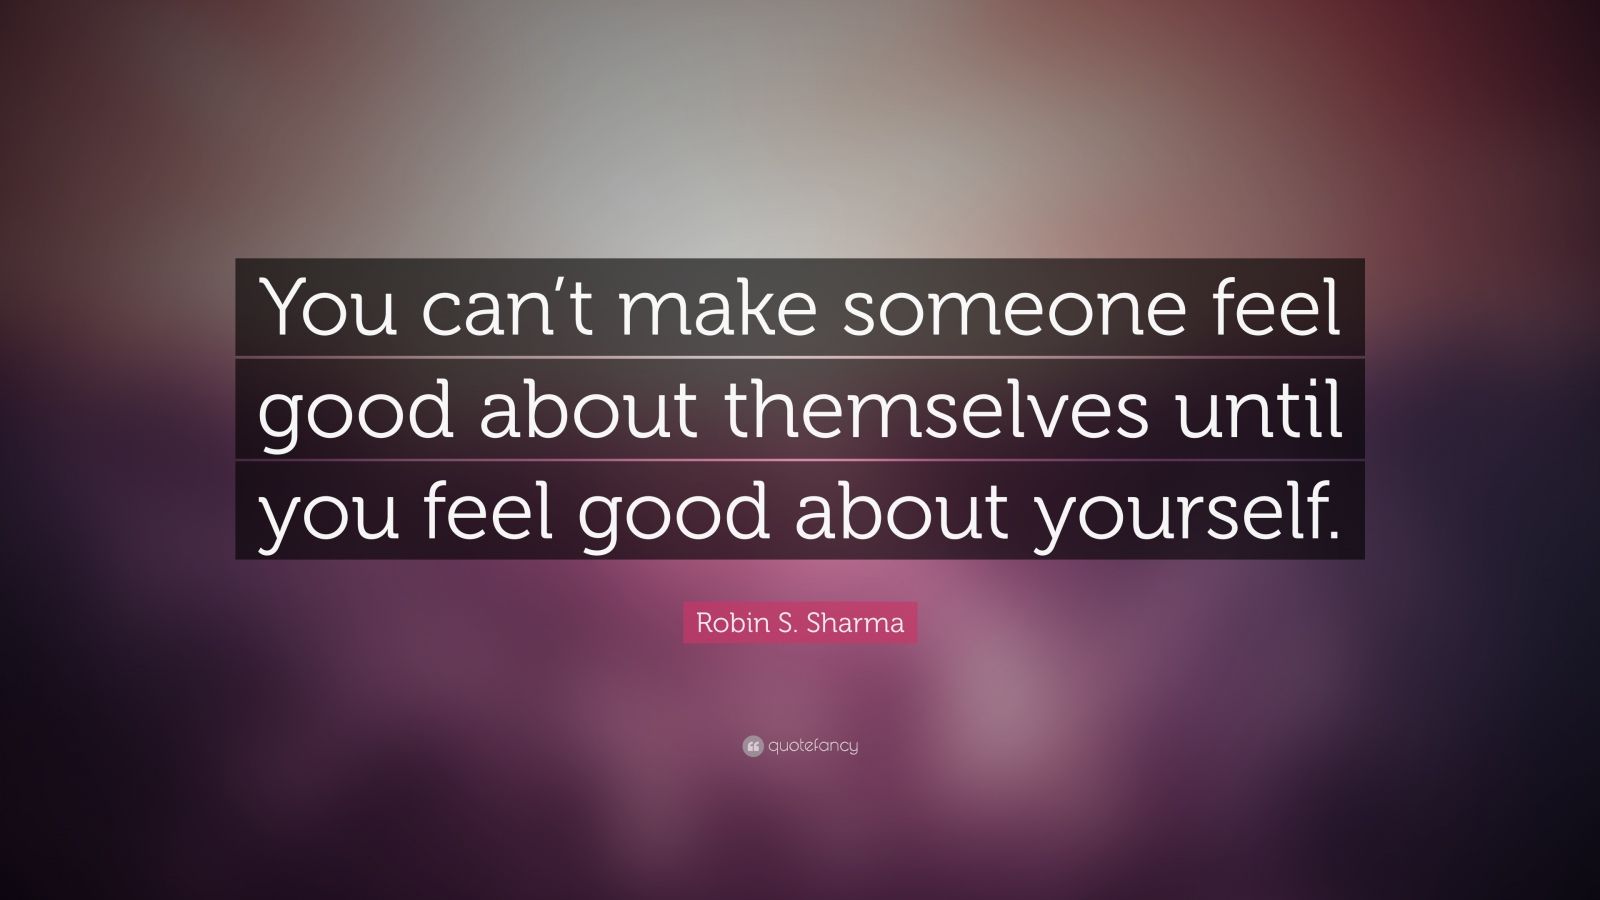 12706 Robin S Sharma Quote You can t make someone feel good about